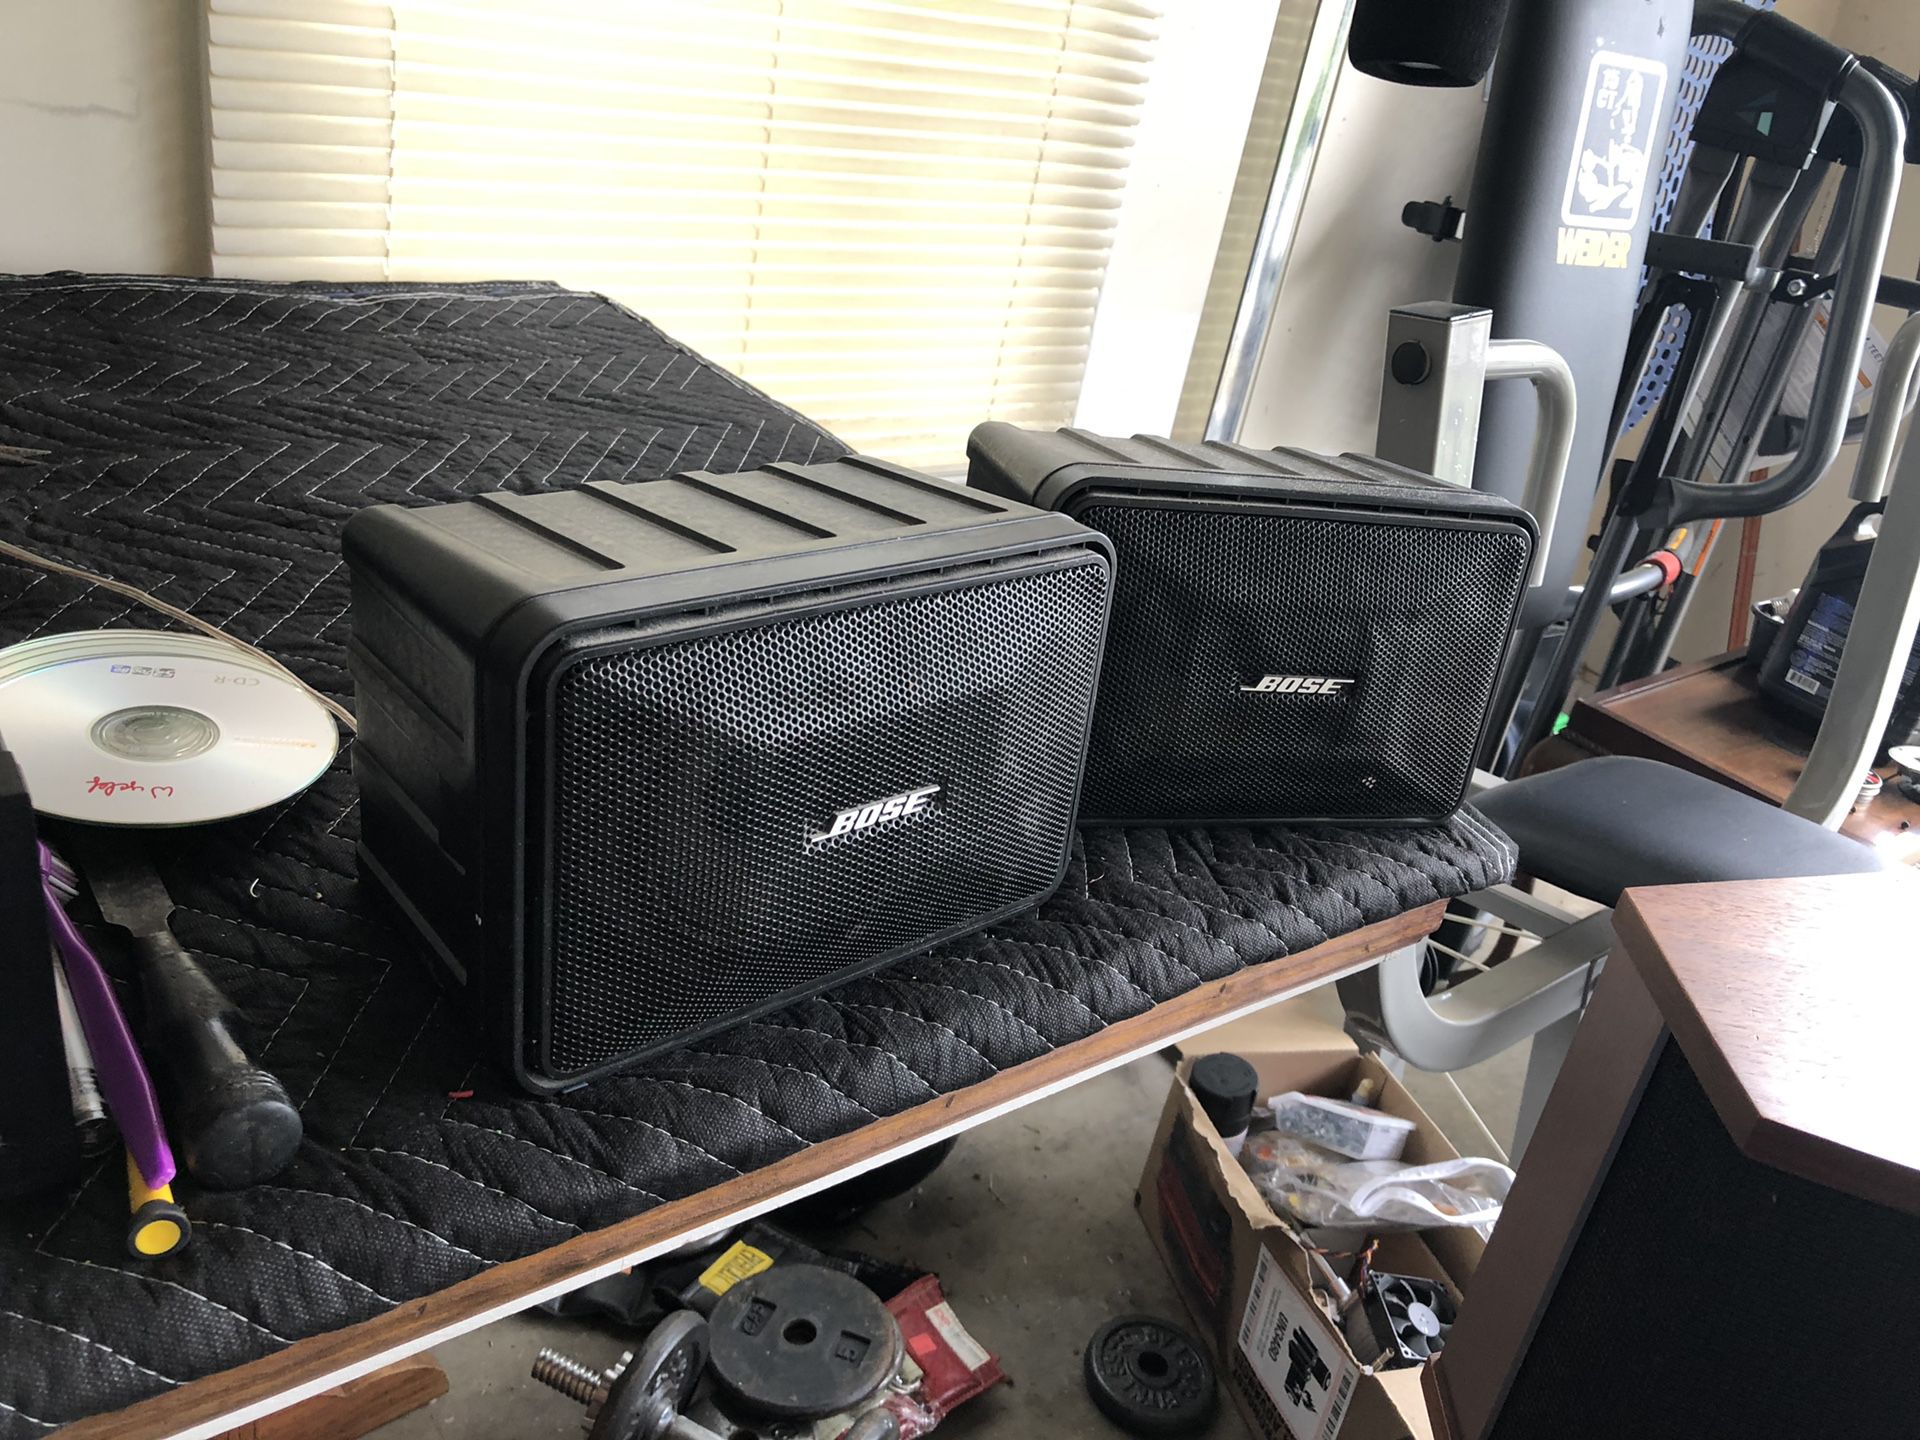 Small Bose speakers